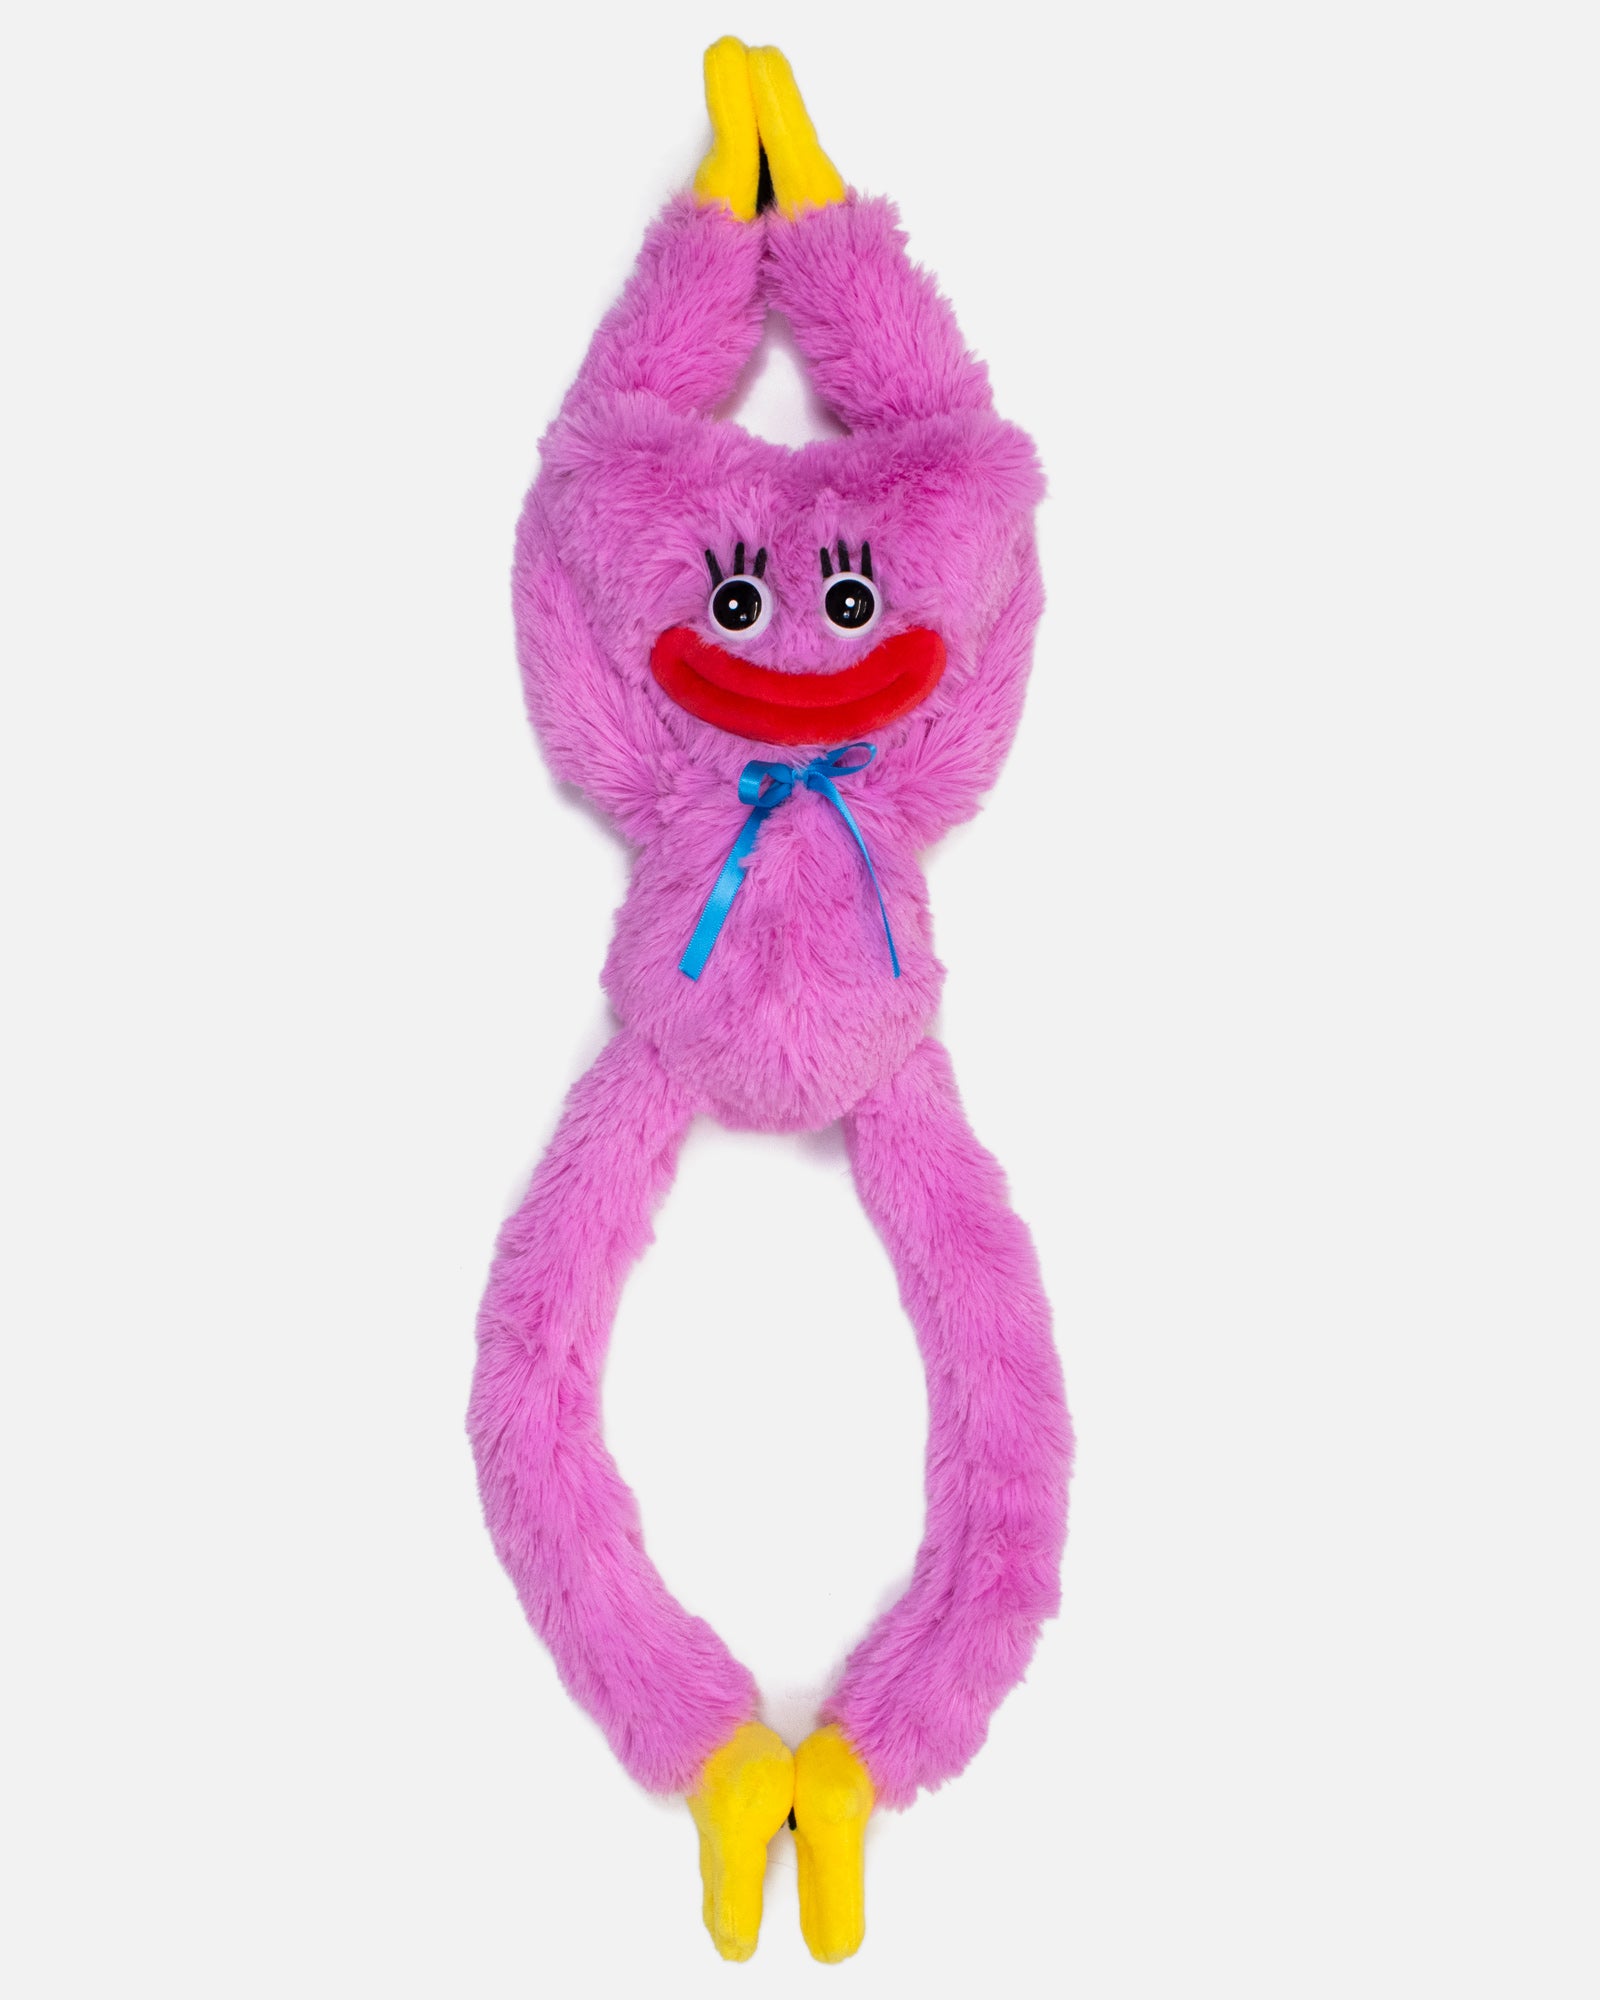 smiling kissy missy poppy playtime 14" plush front. hands velcro together. feet velcro together.